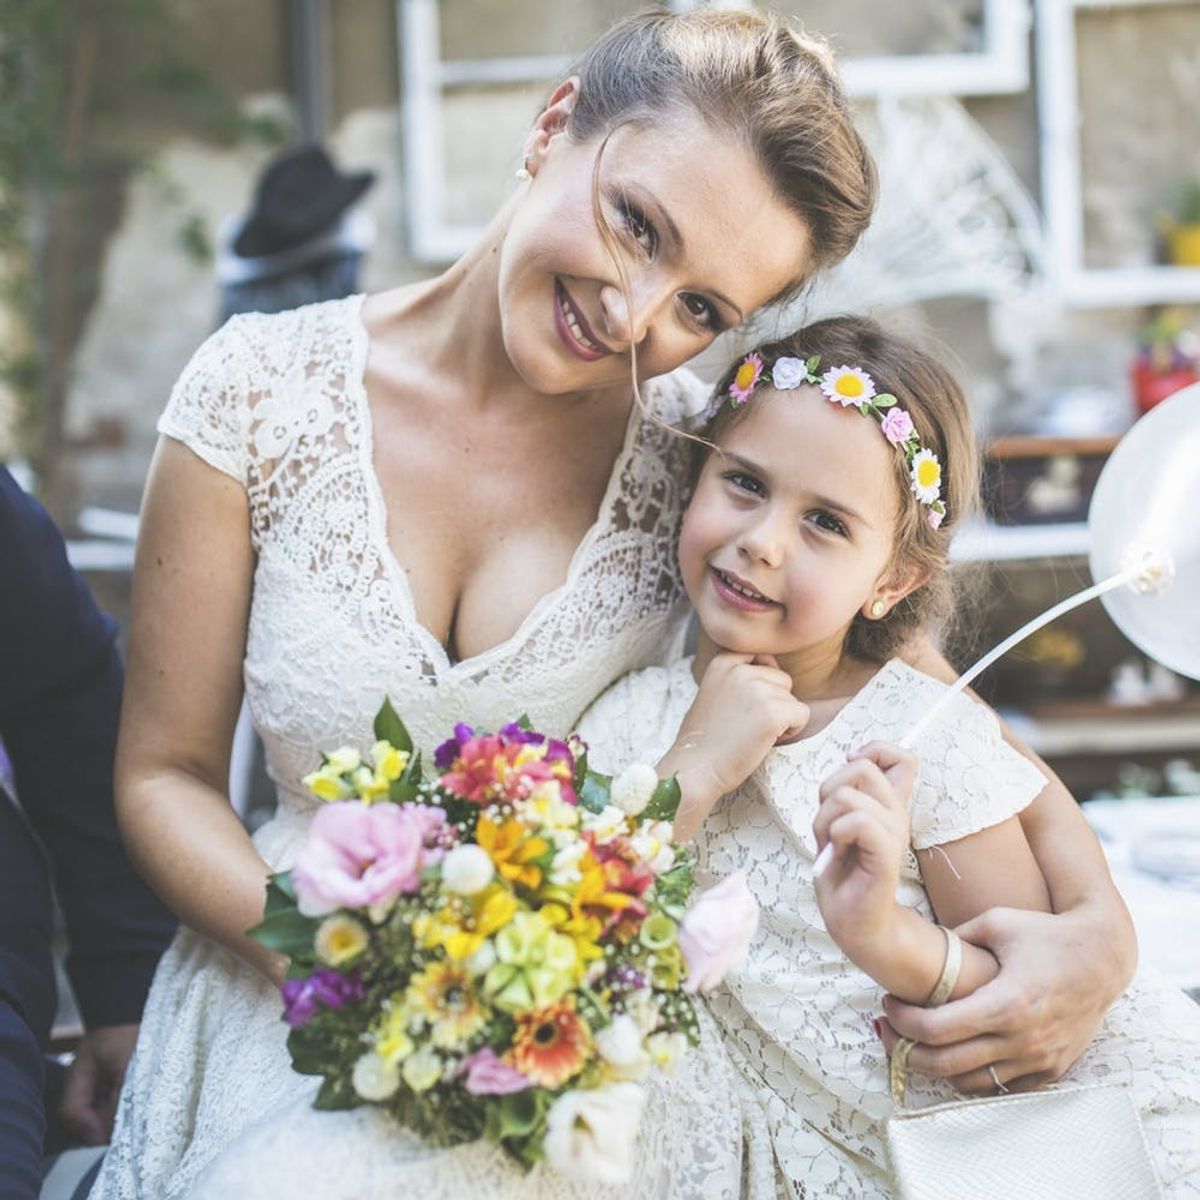 6 Things to Consider Before Bringing Kids to a Wedding